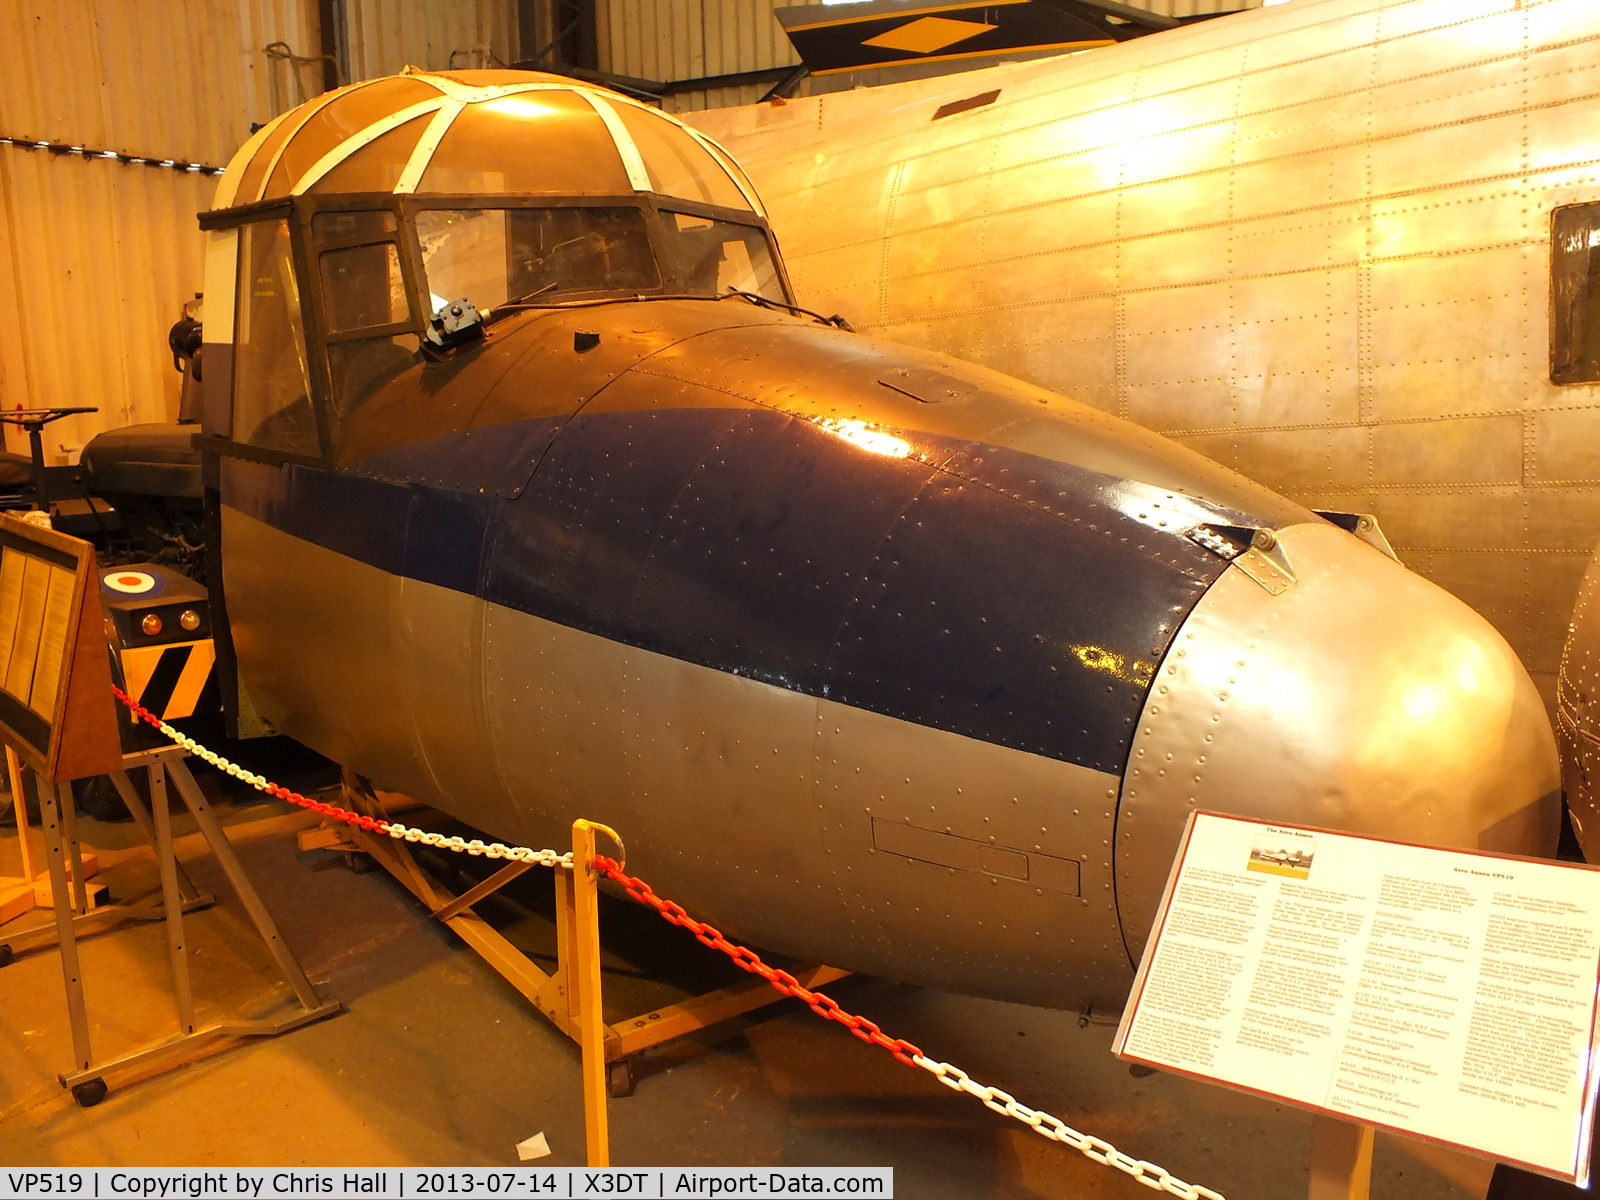 VP519, Avro Anson C19 C/N Not found VP519, preserved at the South Yorkshire Aircraft Museum, AeroVenture, Doncaster